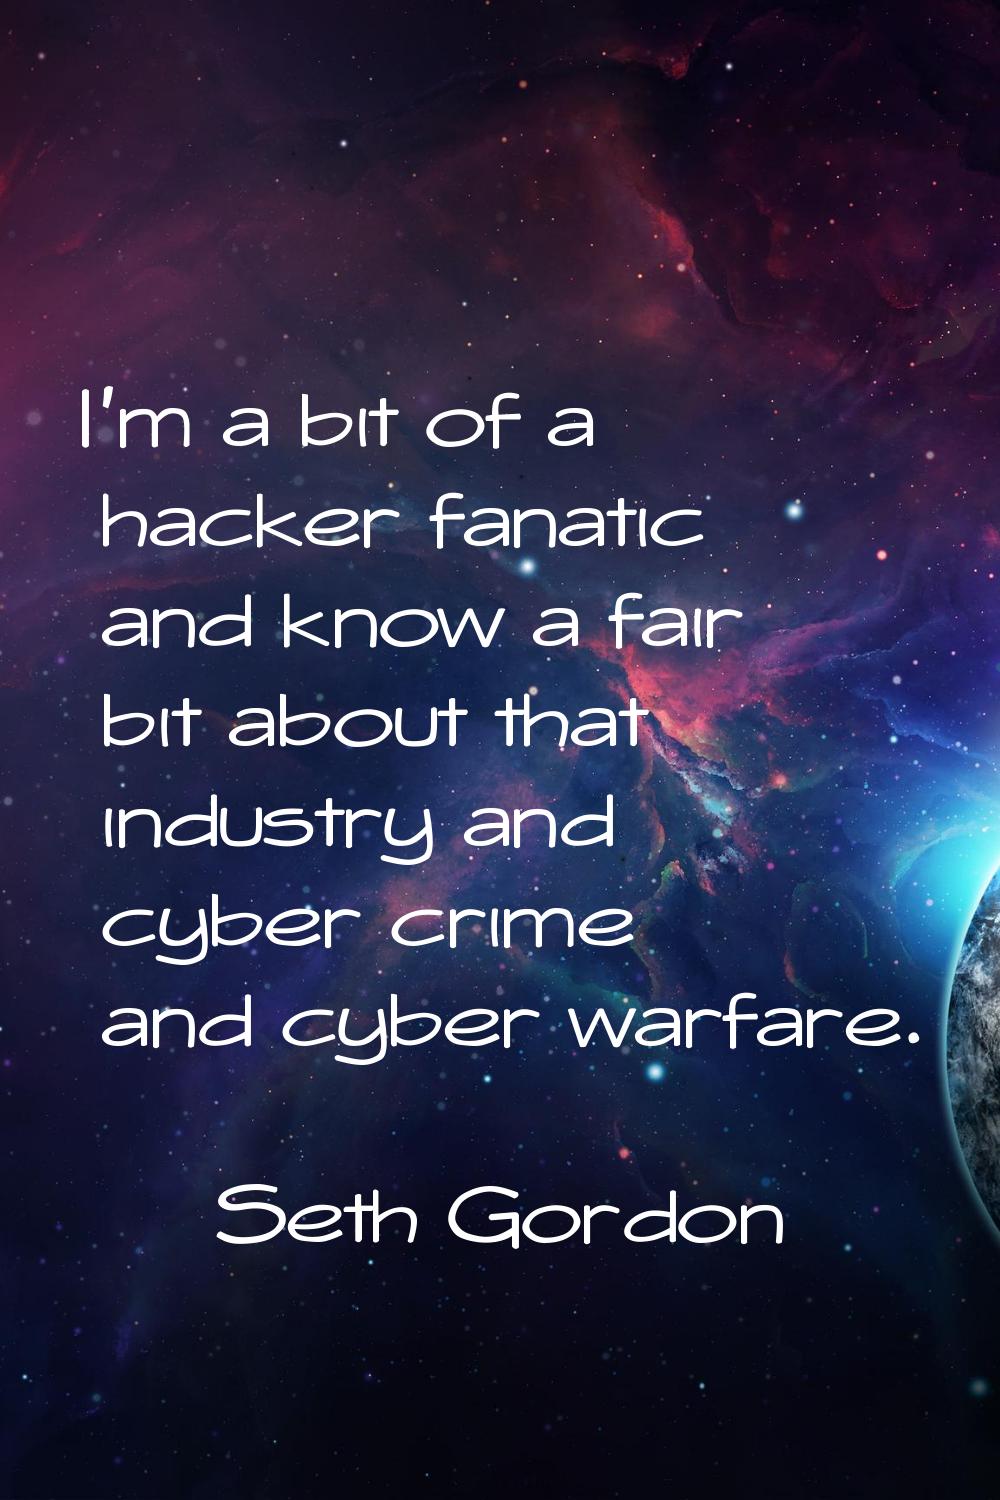 I'm a bit of a hacker fanatic and know a fair bit about that industry and cyber crime and cyber war